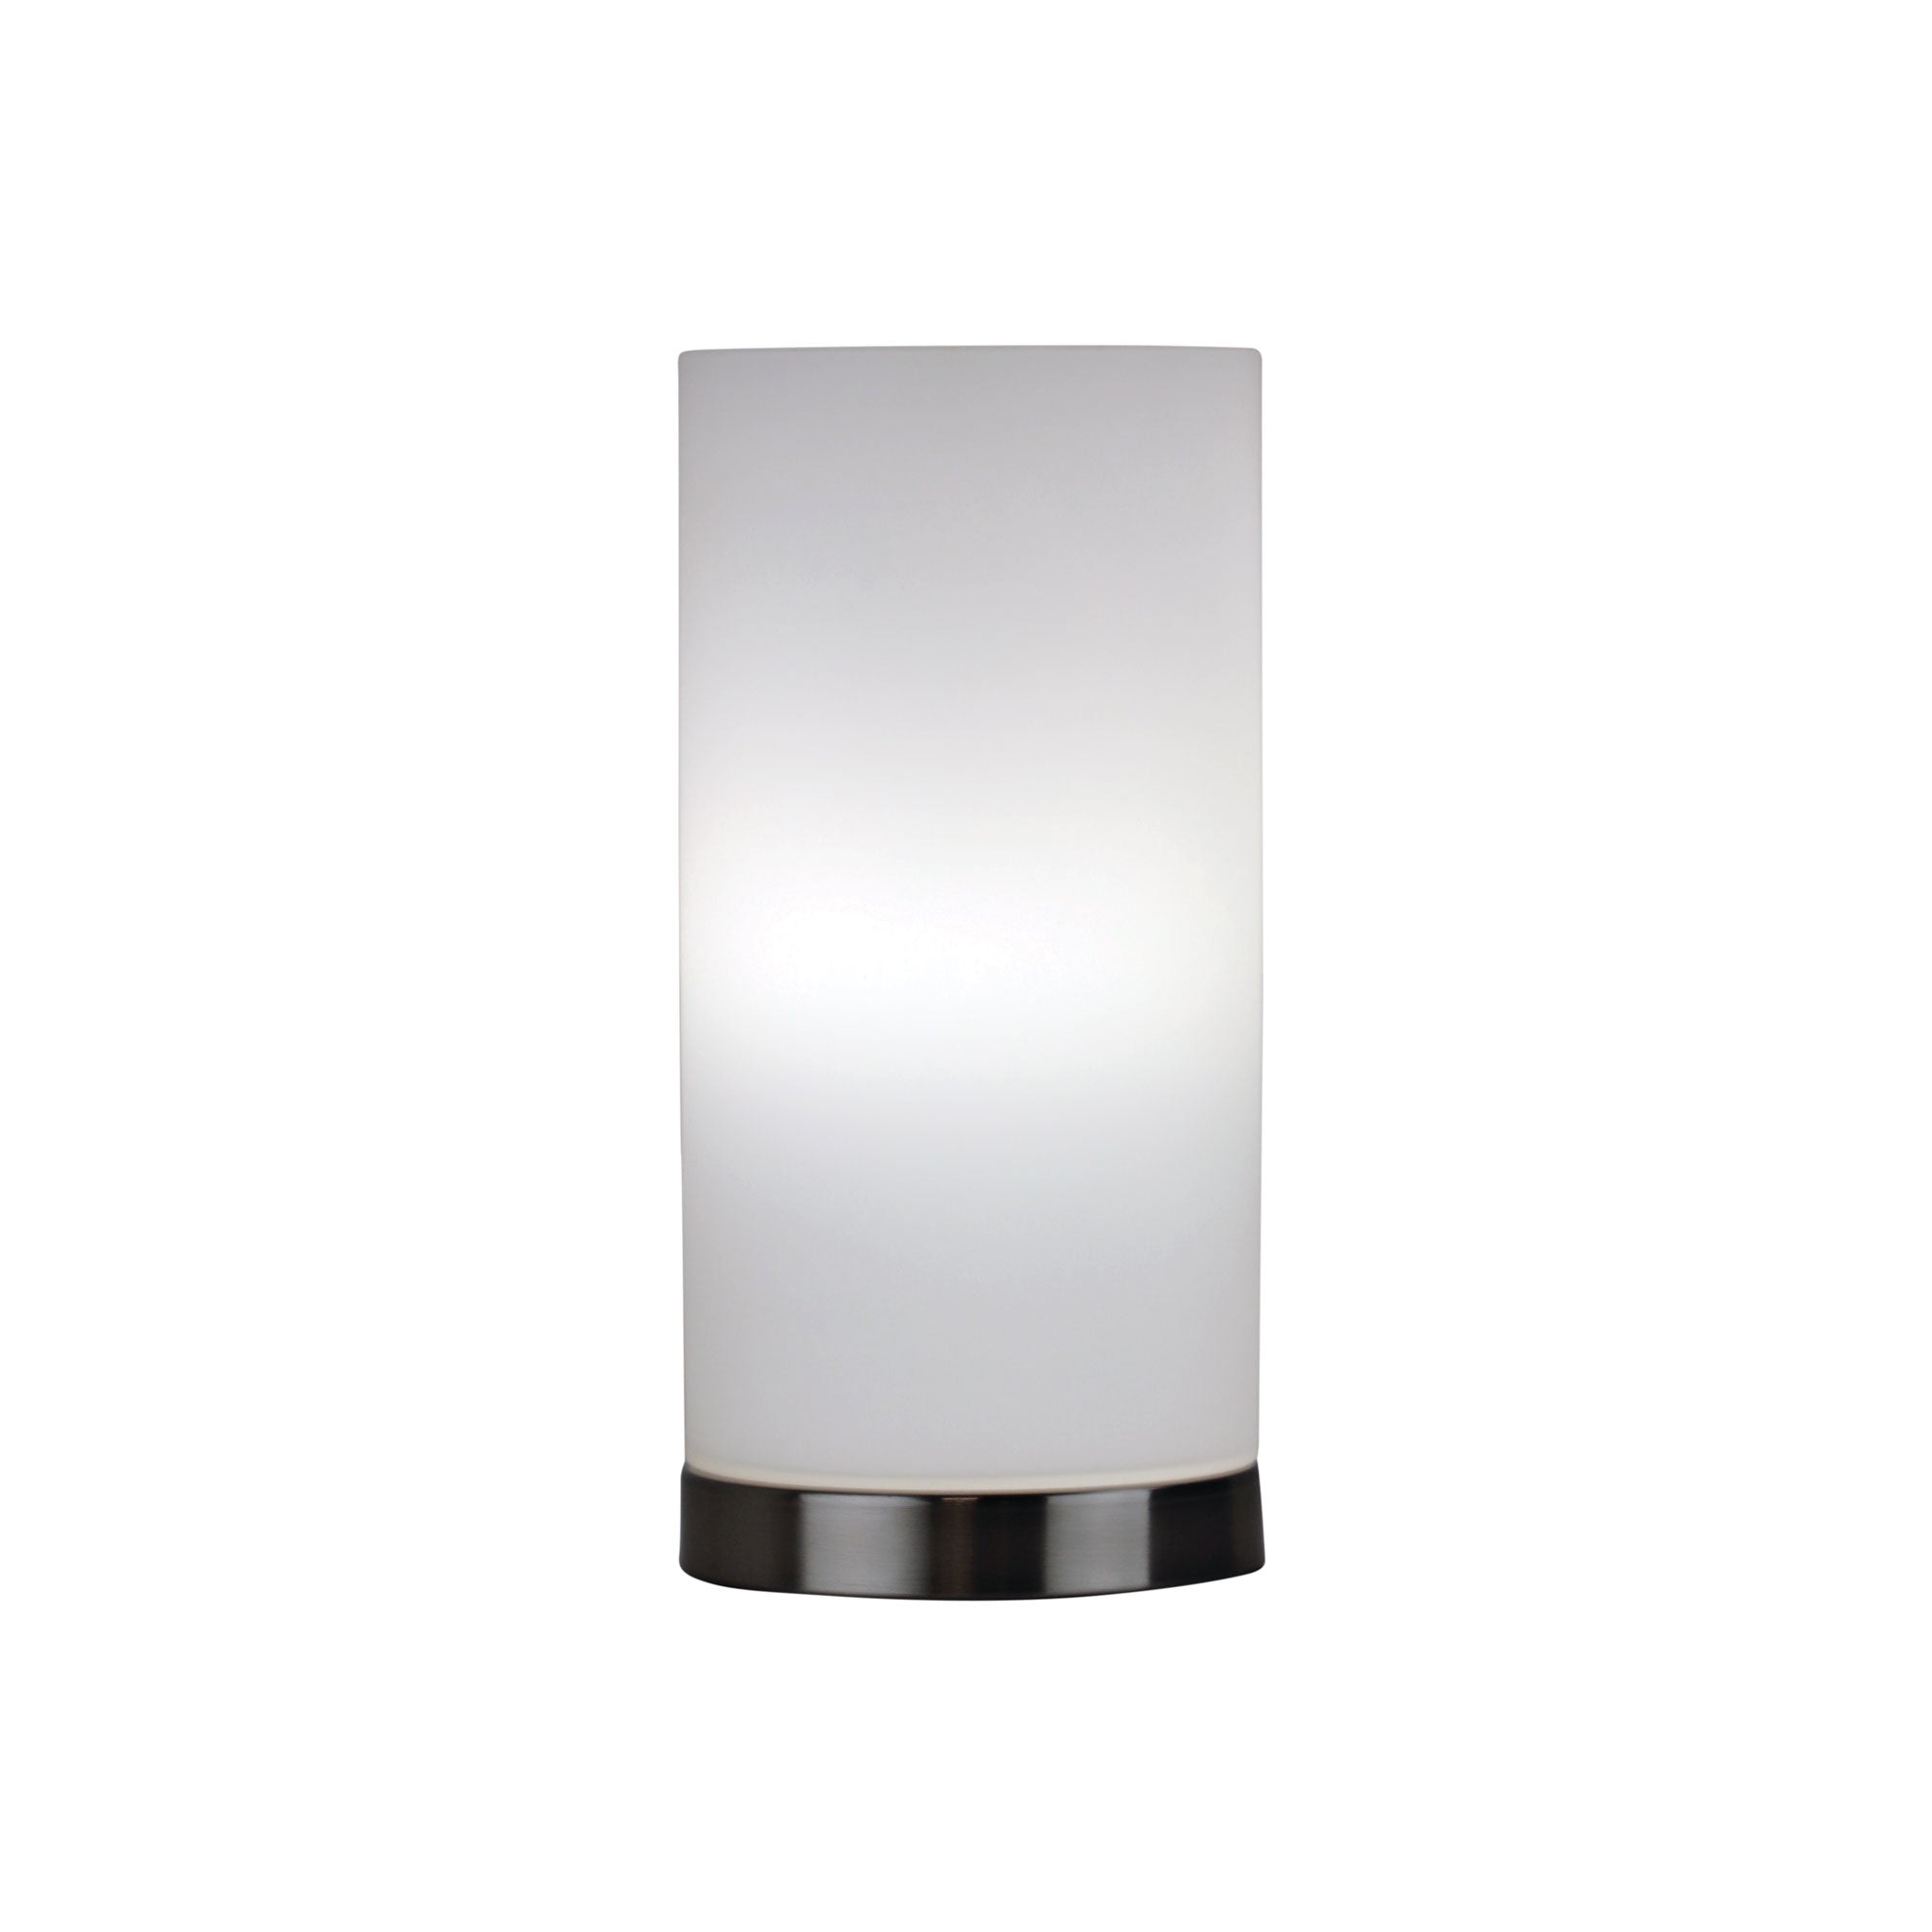 Pablo 1 Light Touch Table Lamp Brushed Chrome & White - OL99485BC